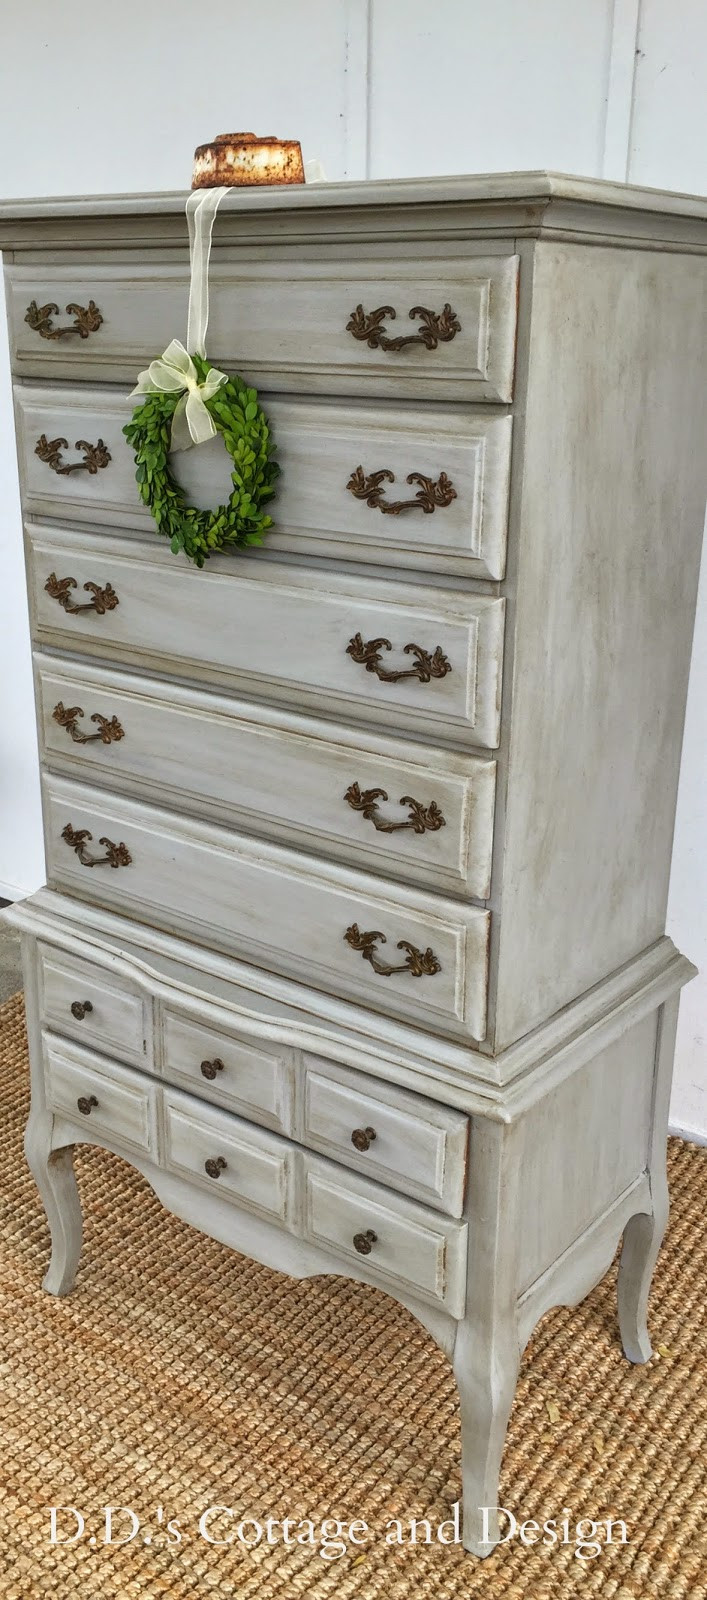 Painting Bedroom Furniture
 D D s Cottage and Design Grey French Provincial Chest on